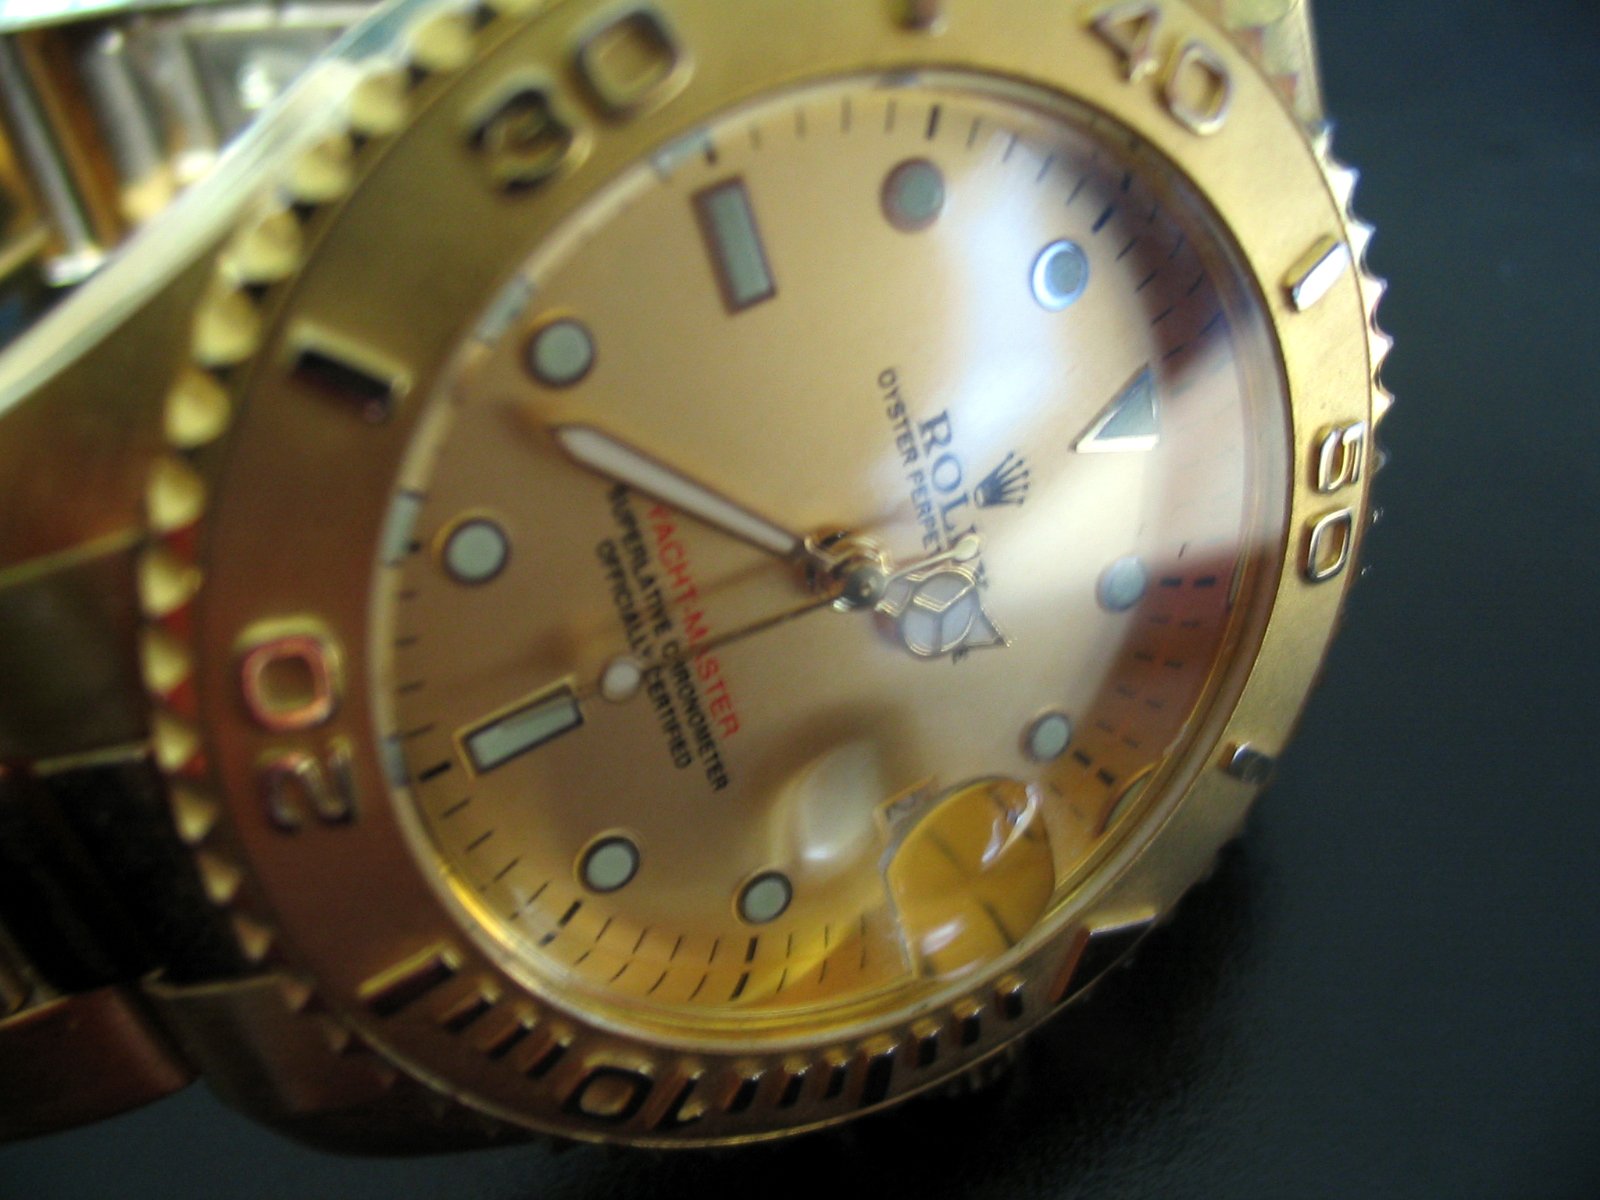 a rolex watch that is shiny gold